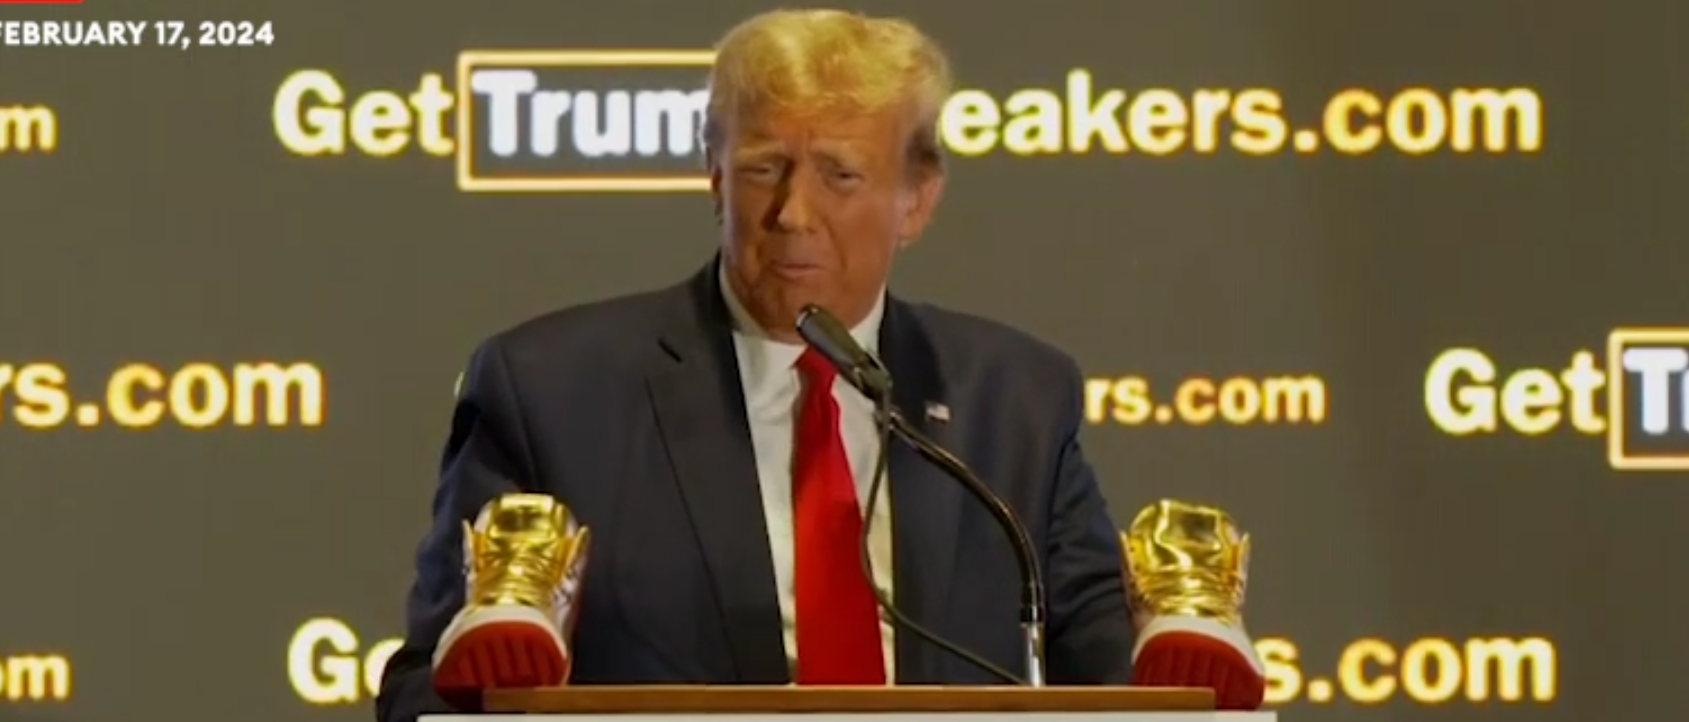 Trump Unveils New $399 ‘Never Surrender’ Footwear At ‘Sneaker Con’ Following $355 Million Ruling Against Him